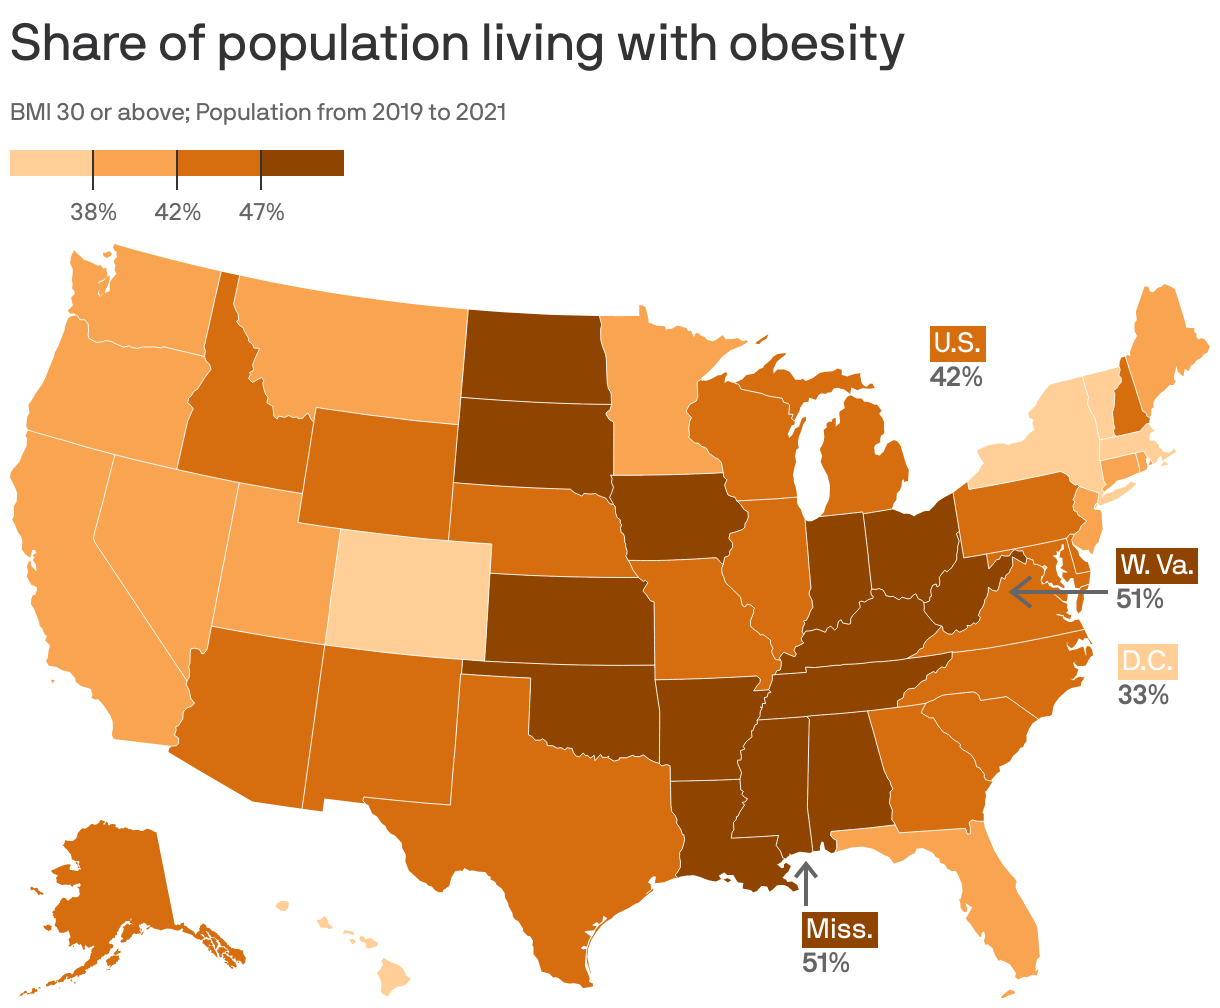 Share of population living with obesity